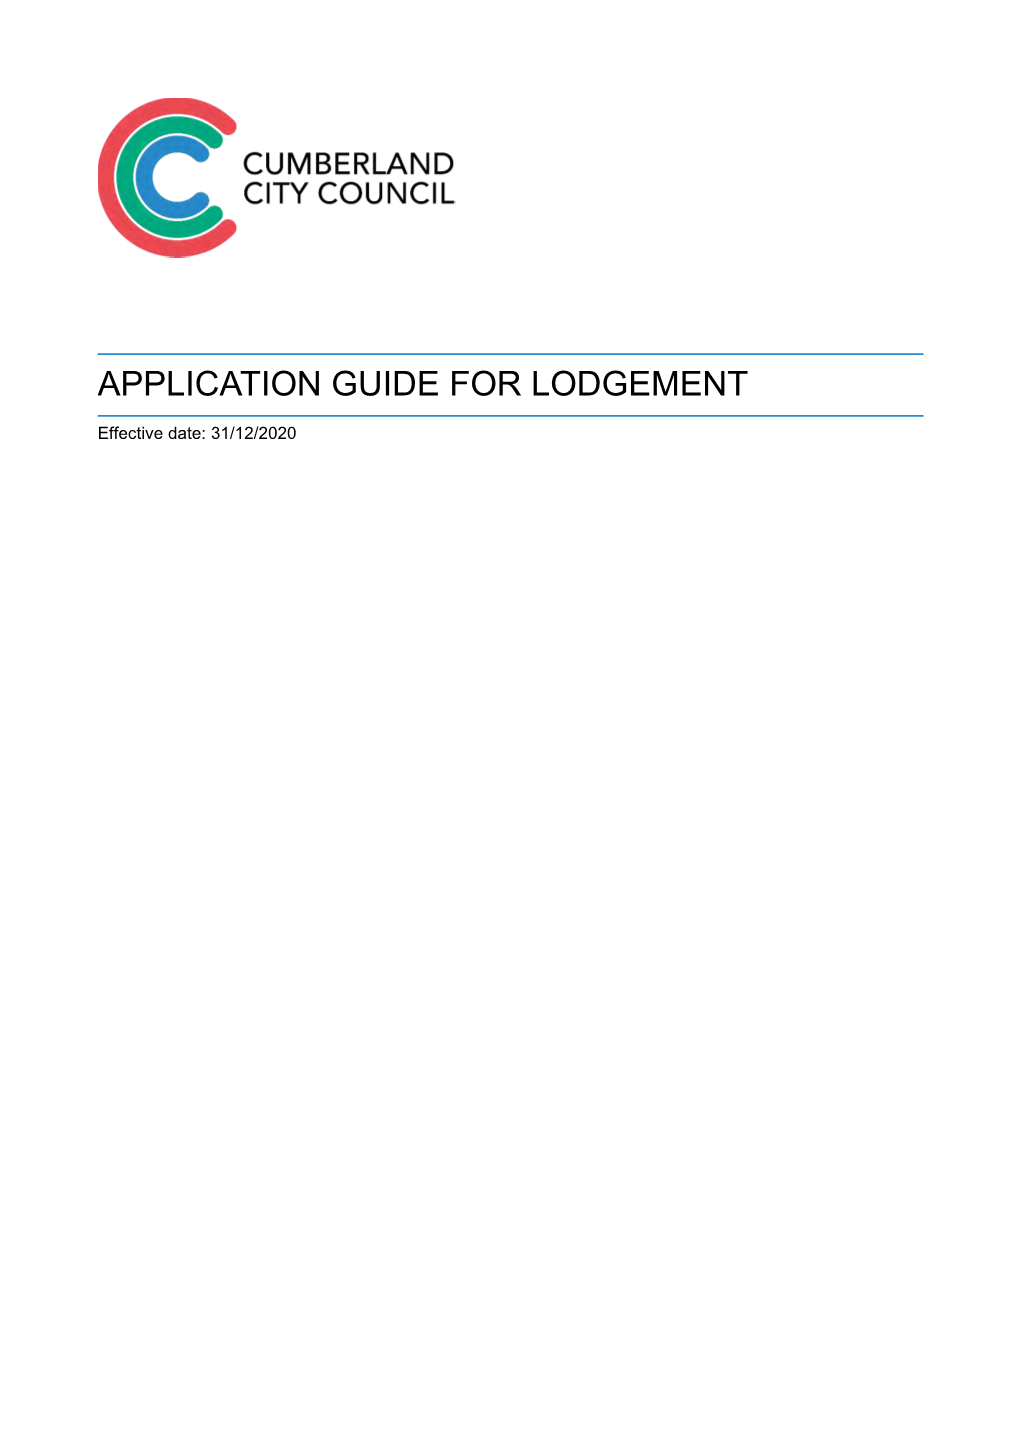 Application Guide for Lodgement